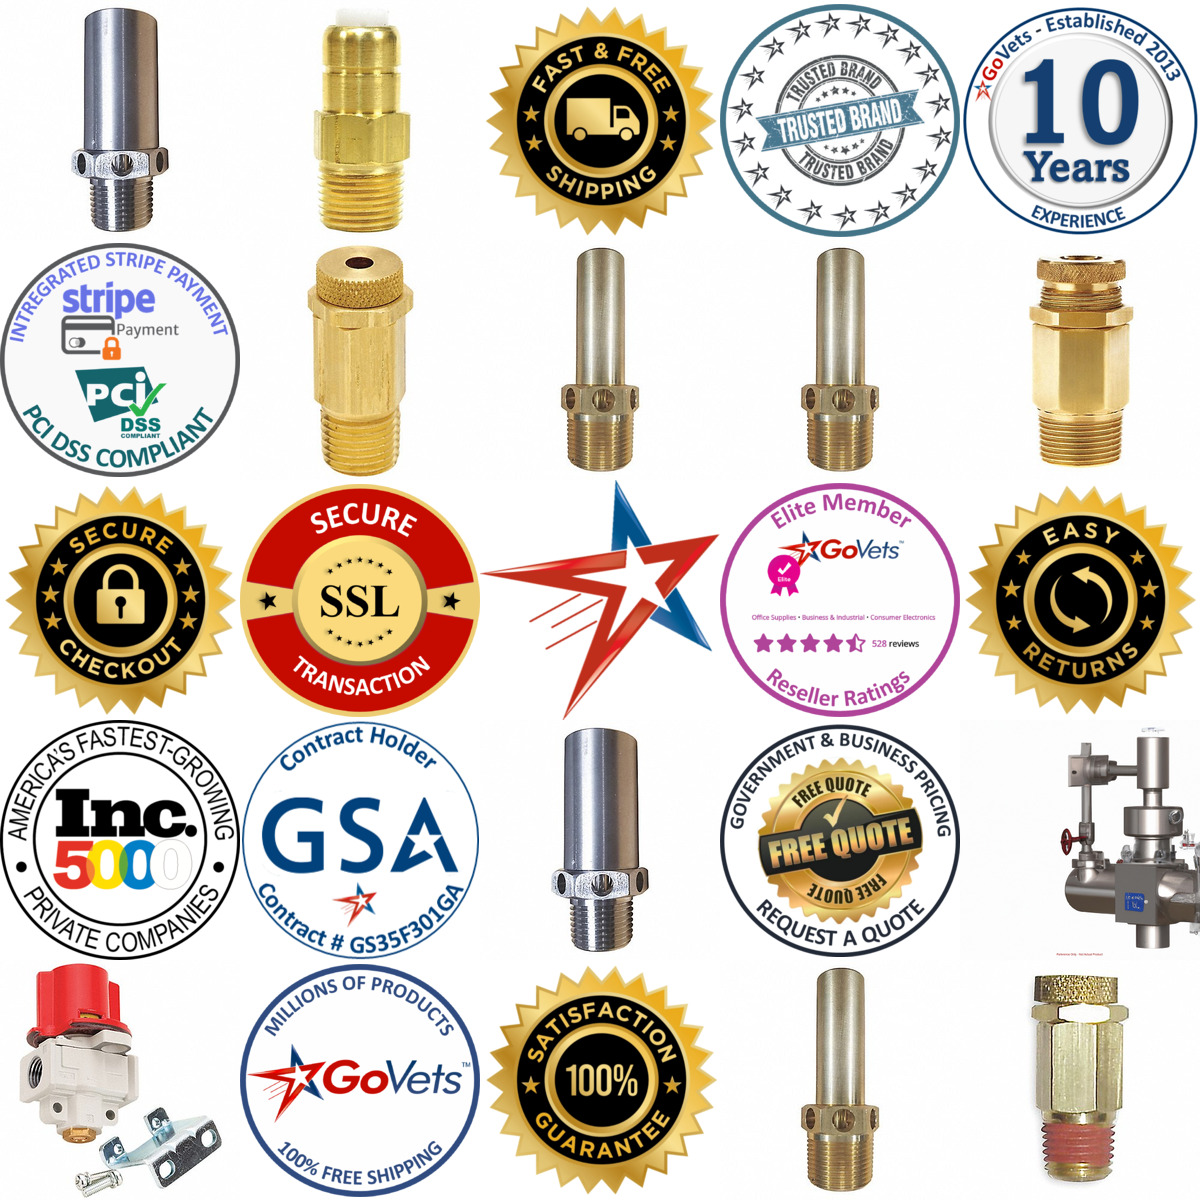 A selection of Vacuum and Pressure Relief Valves products on GoVets